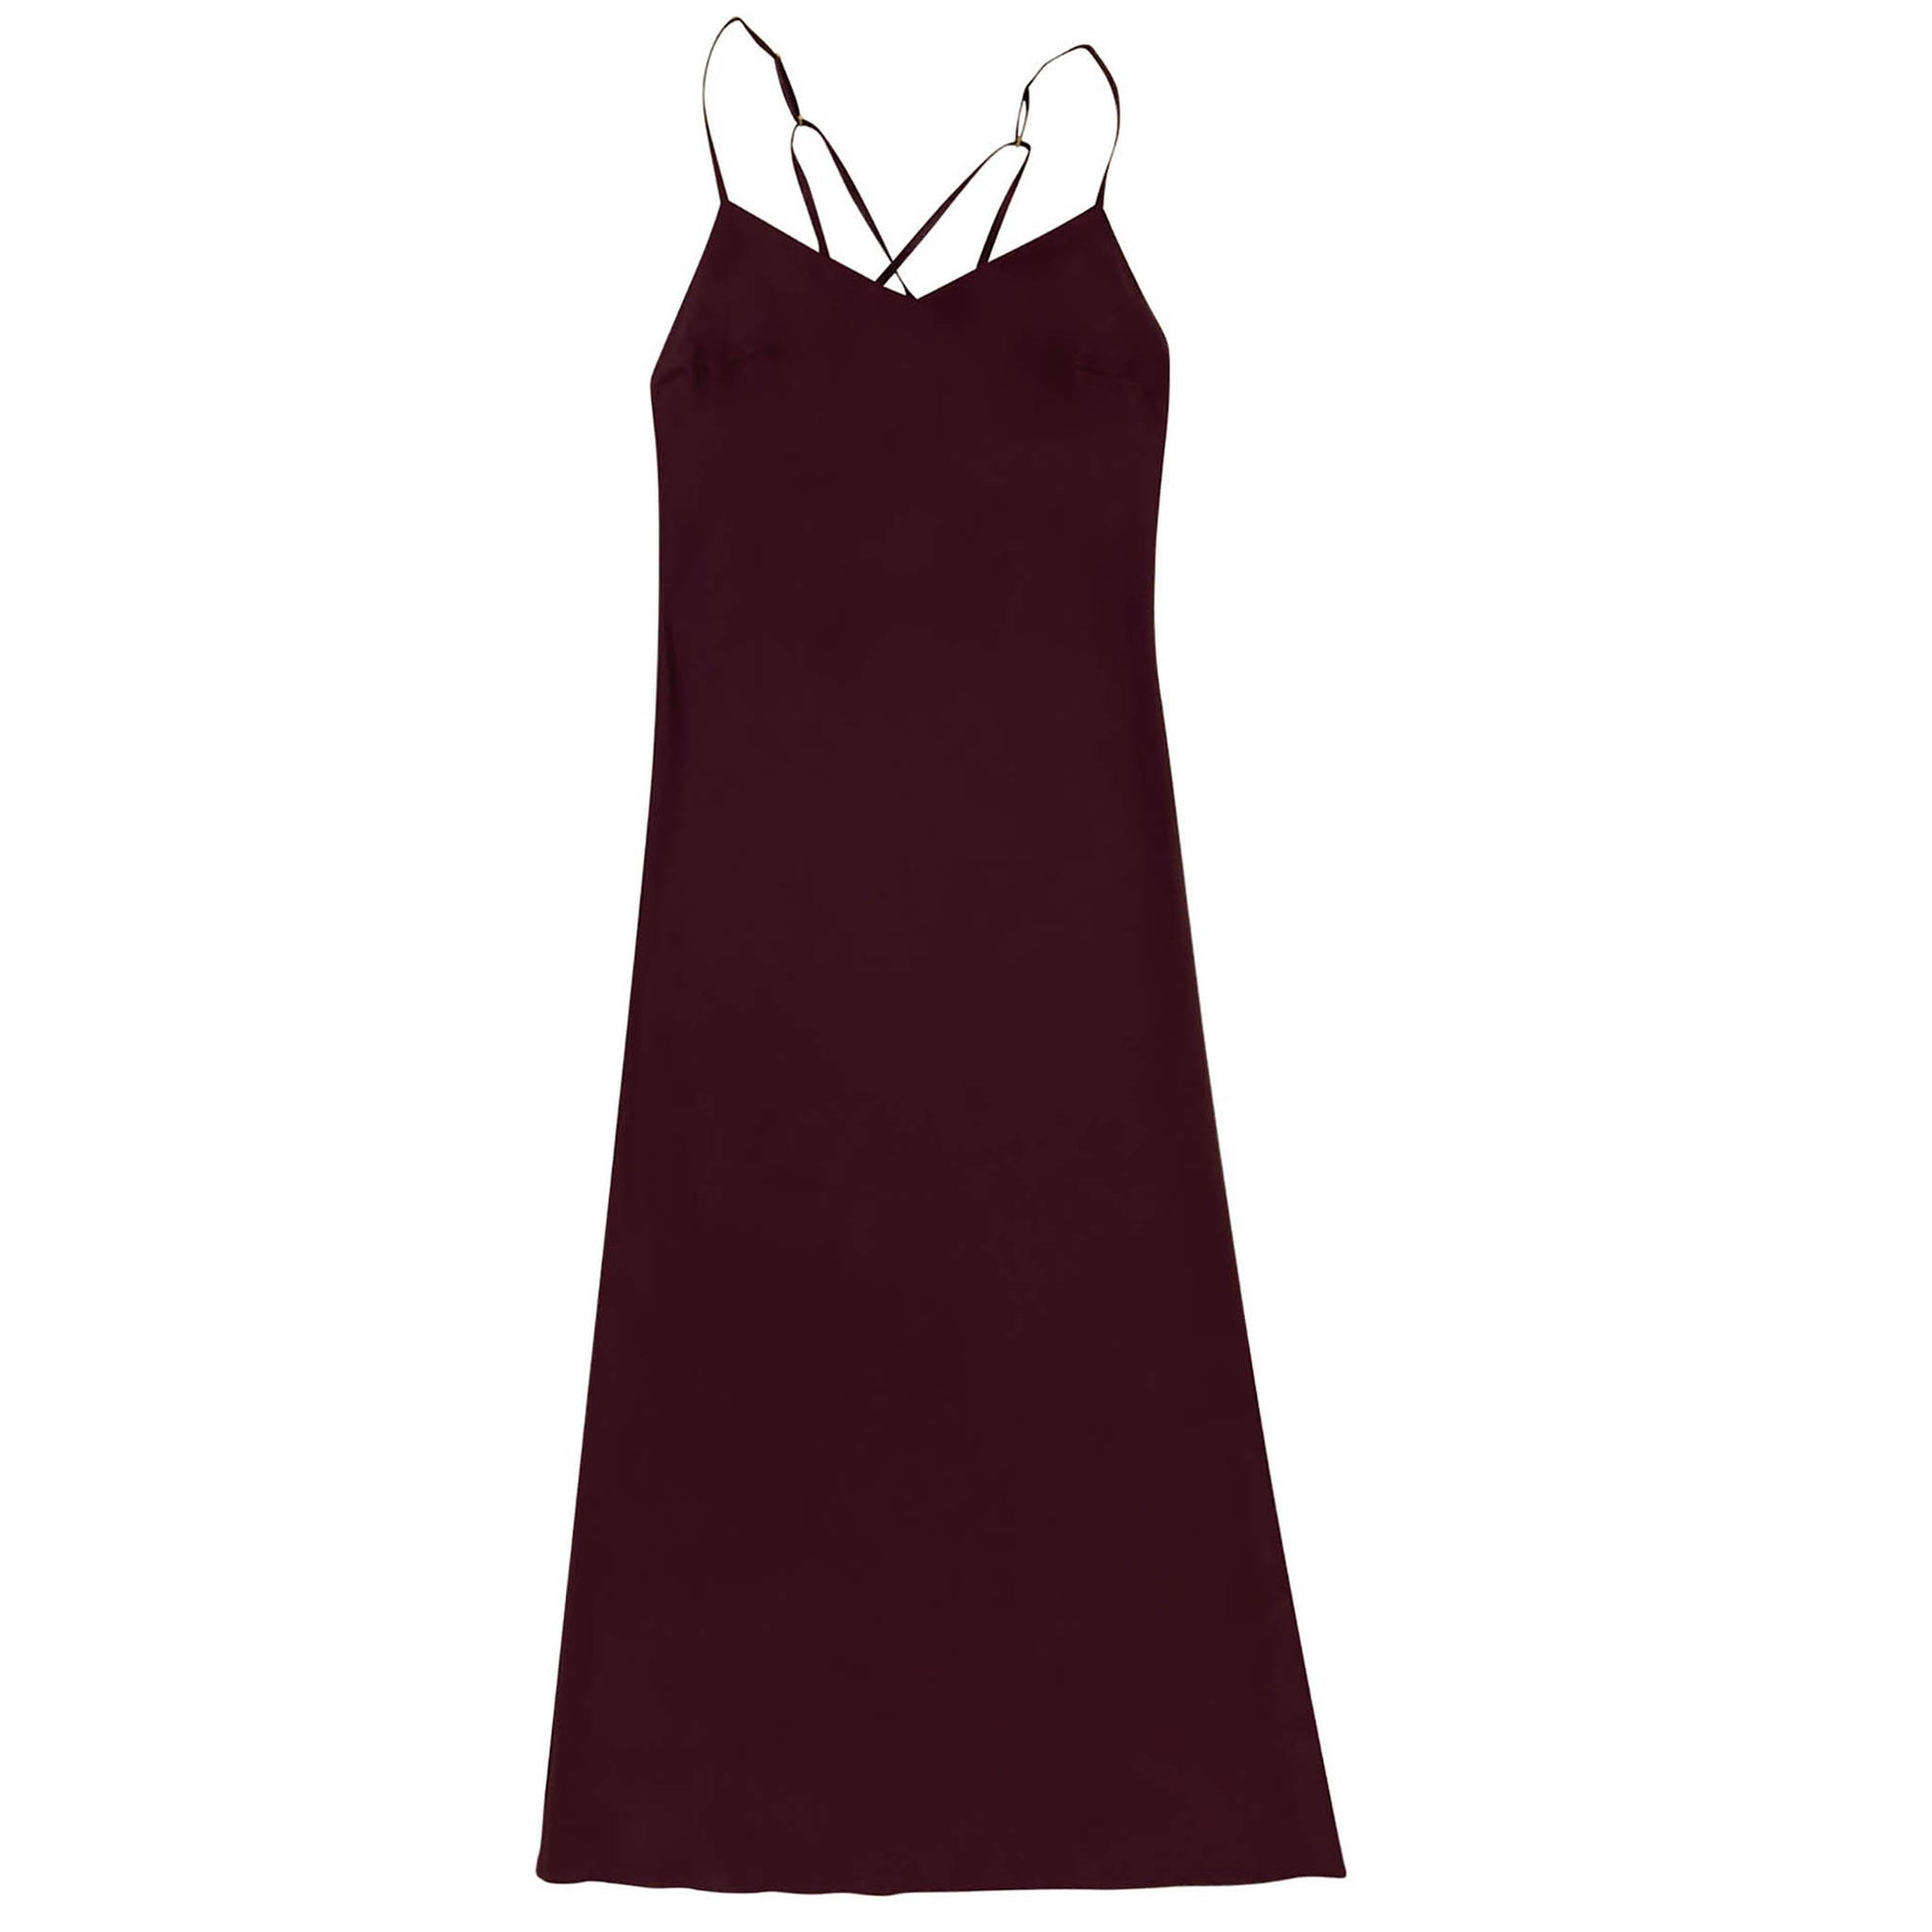 The Lady Chemise is cut from Mulberry silk that glistens and has adjustable spaghetti straps.